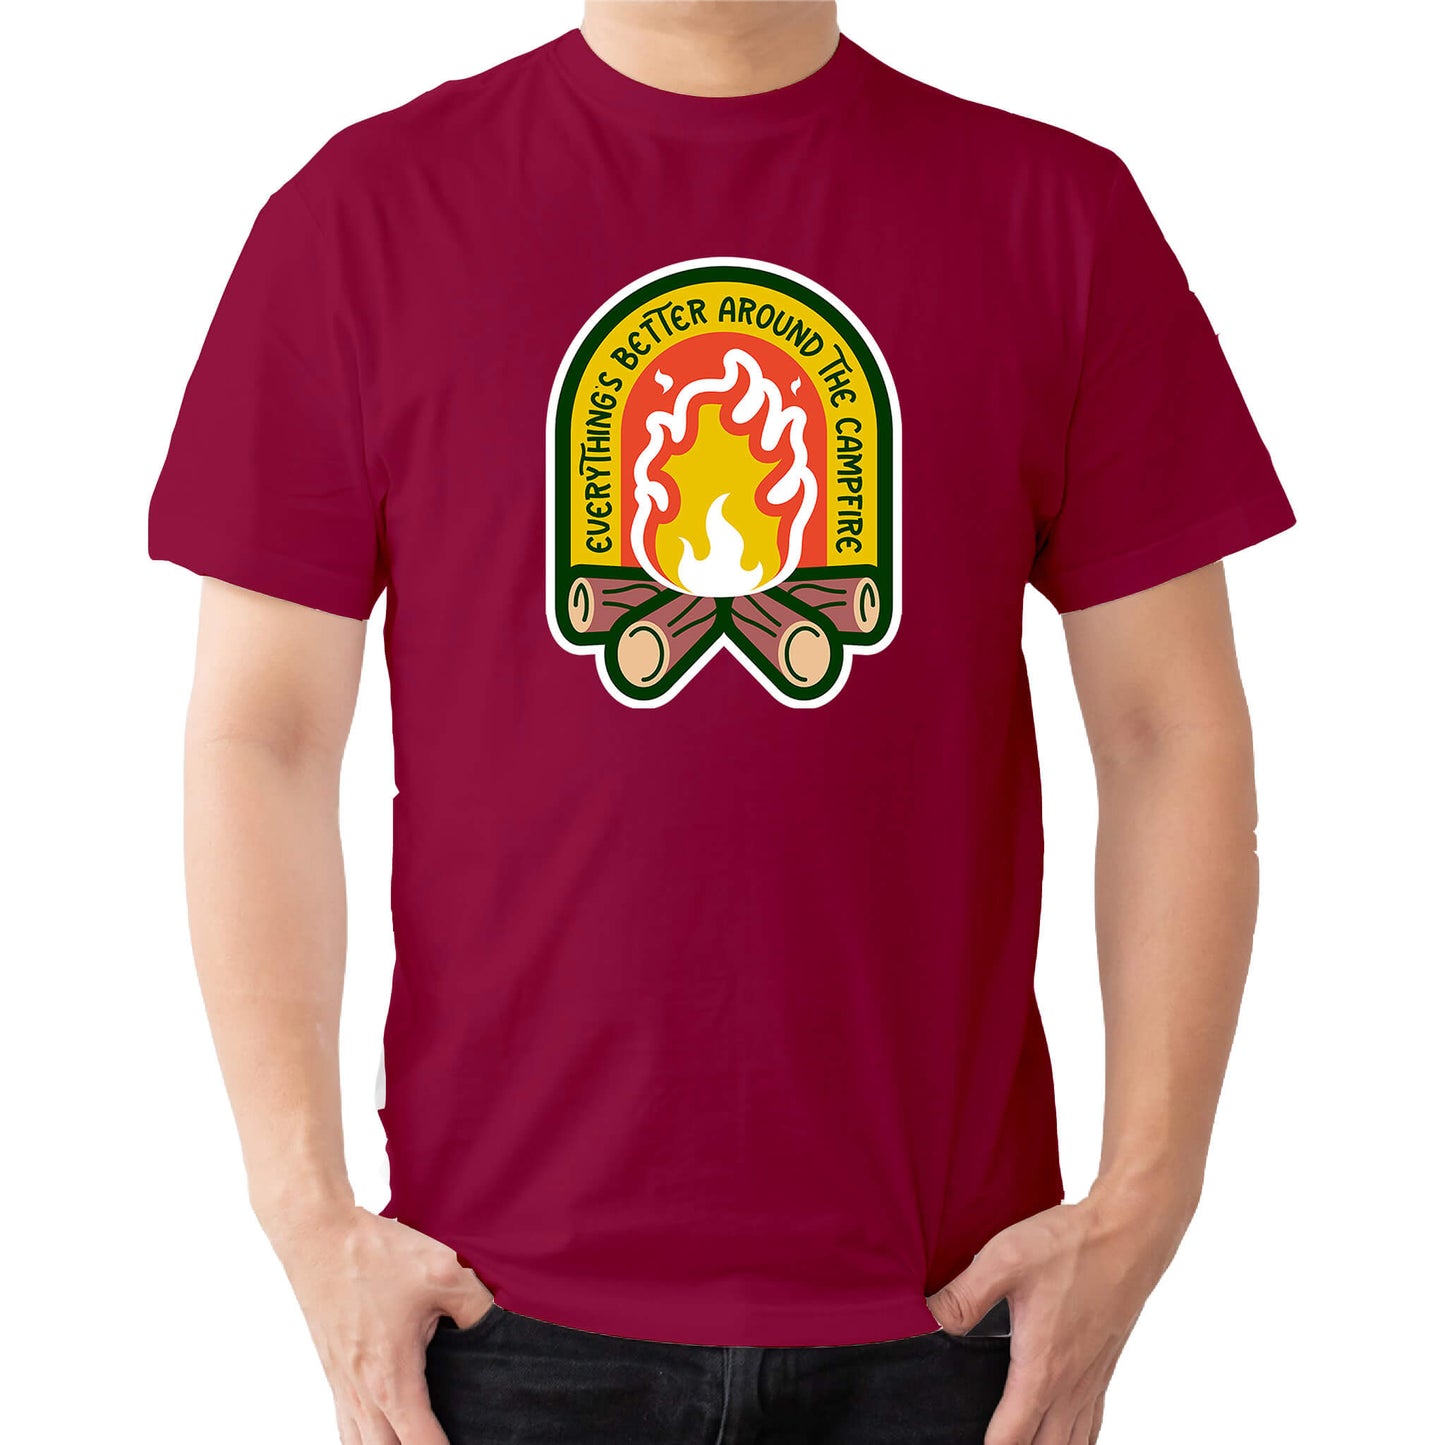 "red Cozy tee featuring a campfire image, perfect for outdoor enthusiasts. Text says: 'Everything is better around the campfire.' Embrace the warmth and camaraderie!"